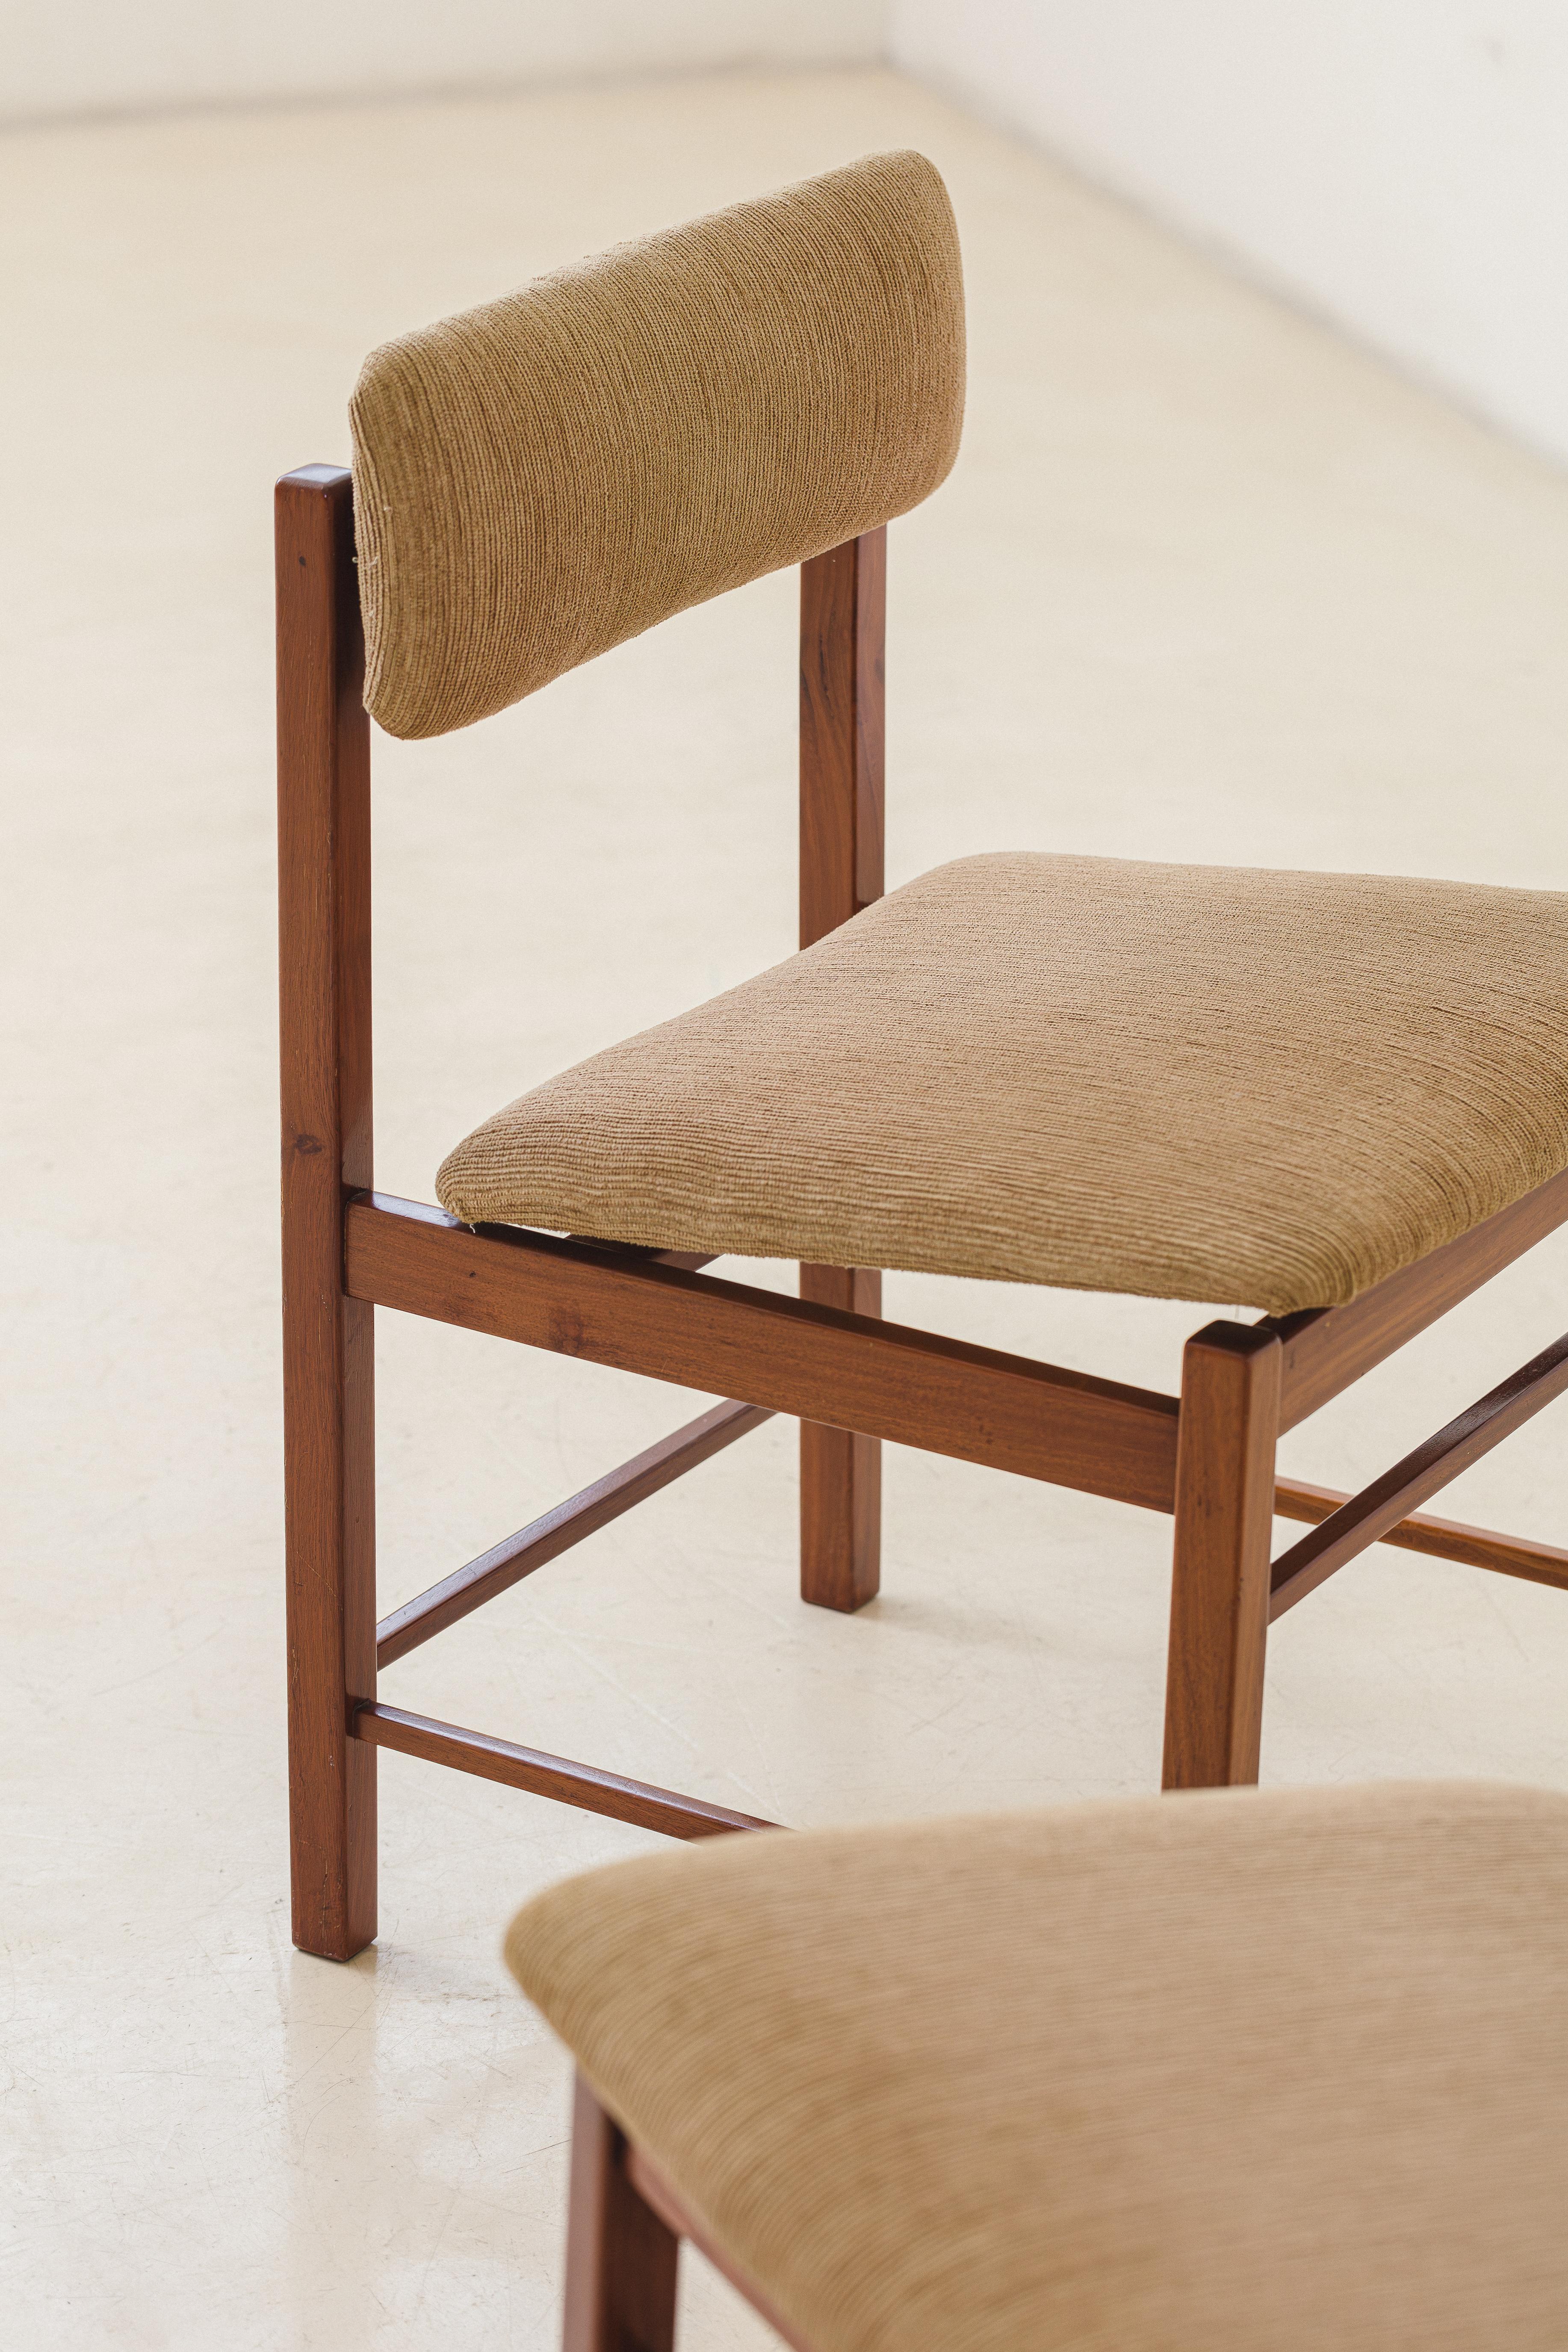 Set of Six Dining Chairs by Ernesto Hauner, Freijó Wood, Mobilinea, 1960s For Sale 10